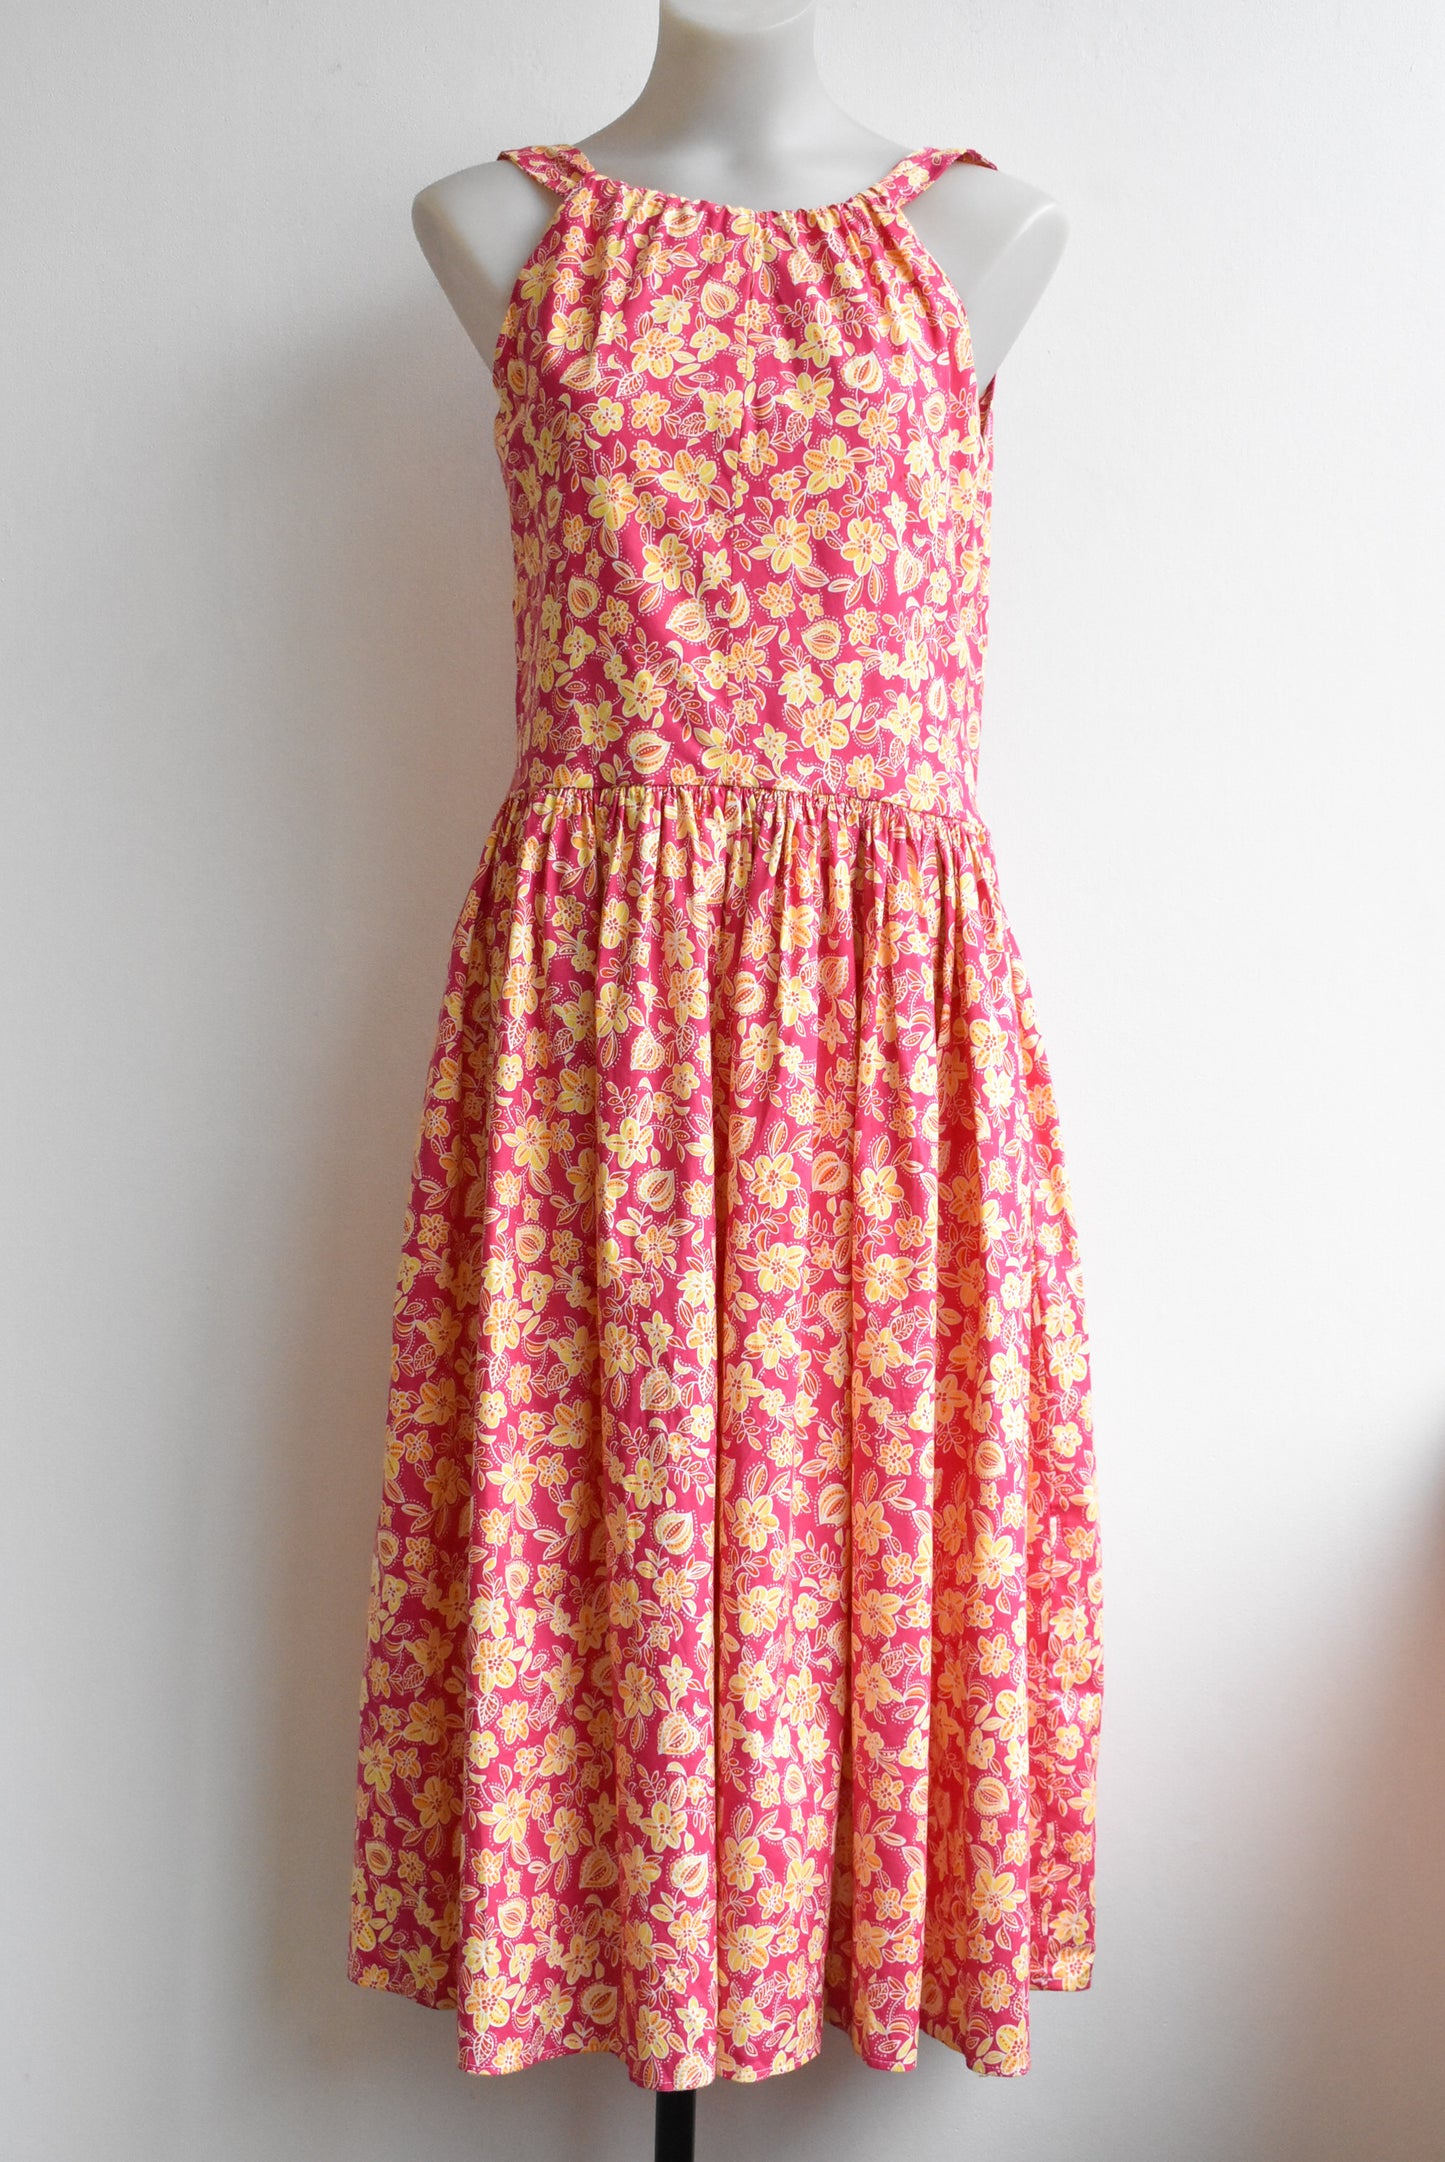 Hot pink yellow floral halter dress, size S-M